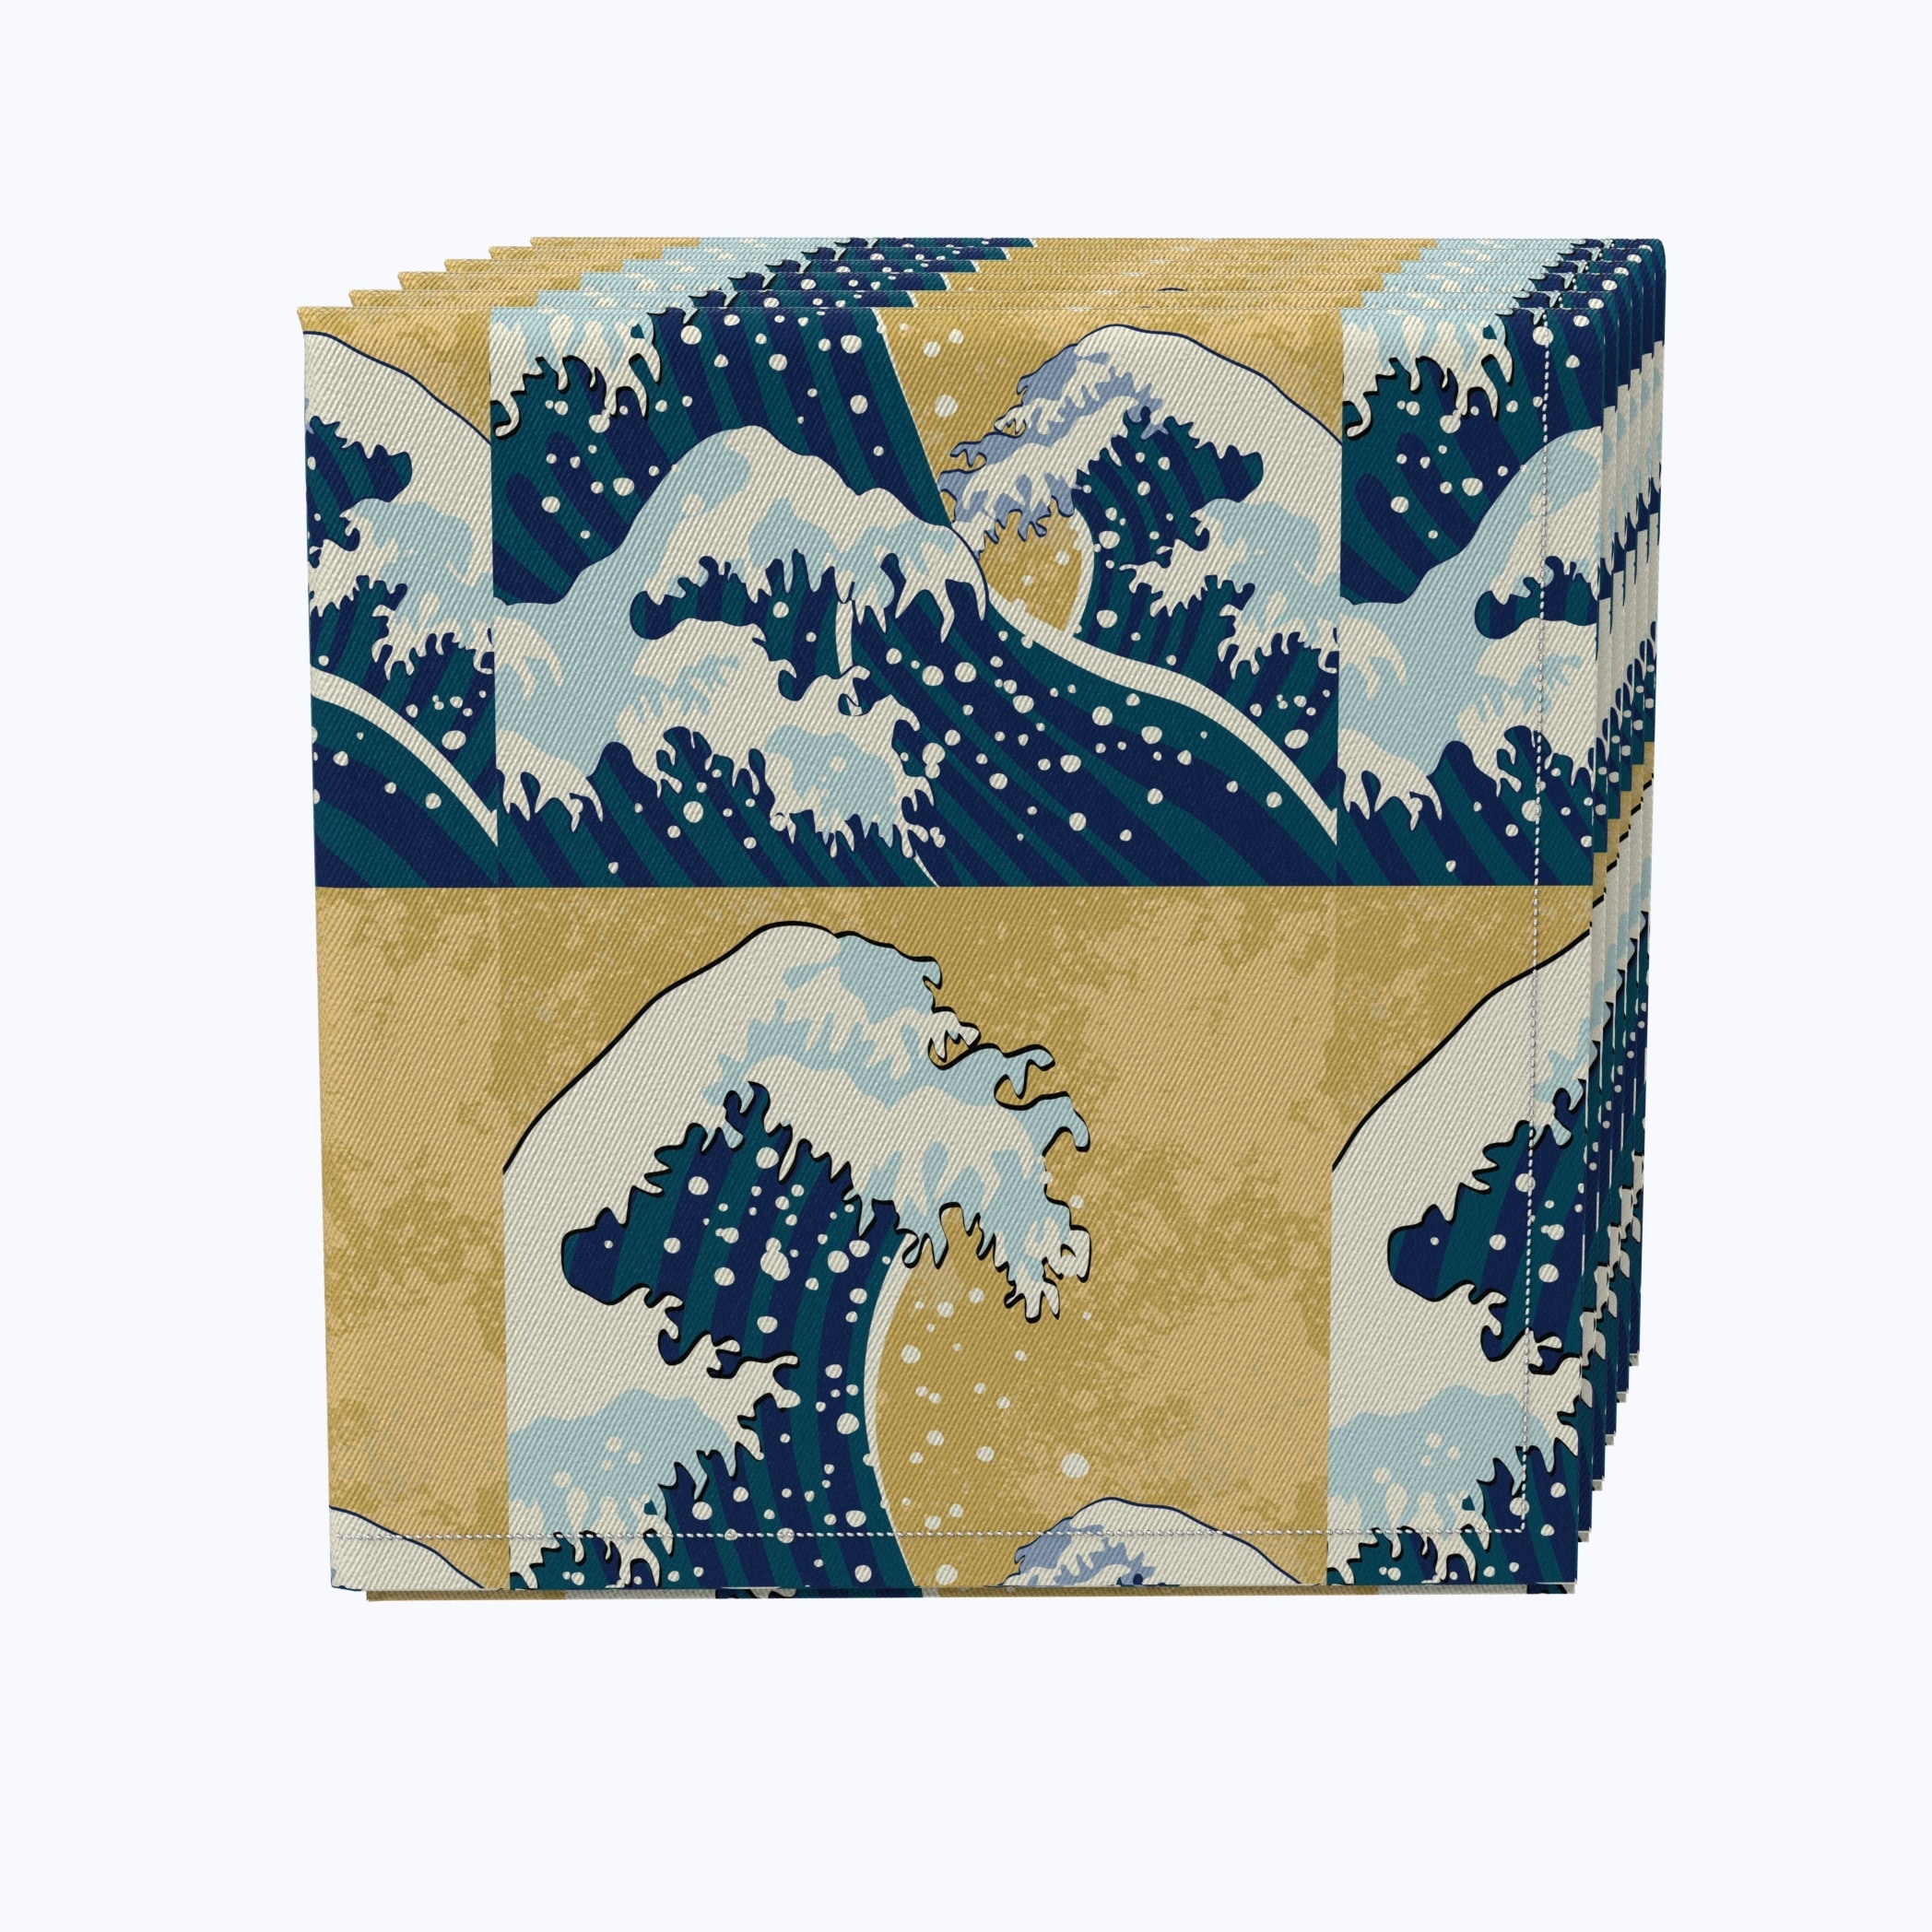 Fabric Textile Products, Inc. Napkin Set of 4, 100% Cotton, 20x20", Japanese Wave Painting - 20 x 20